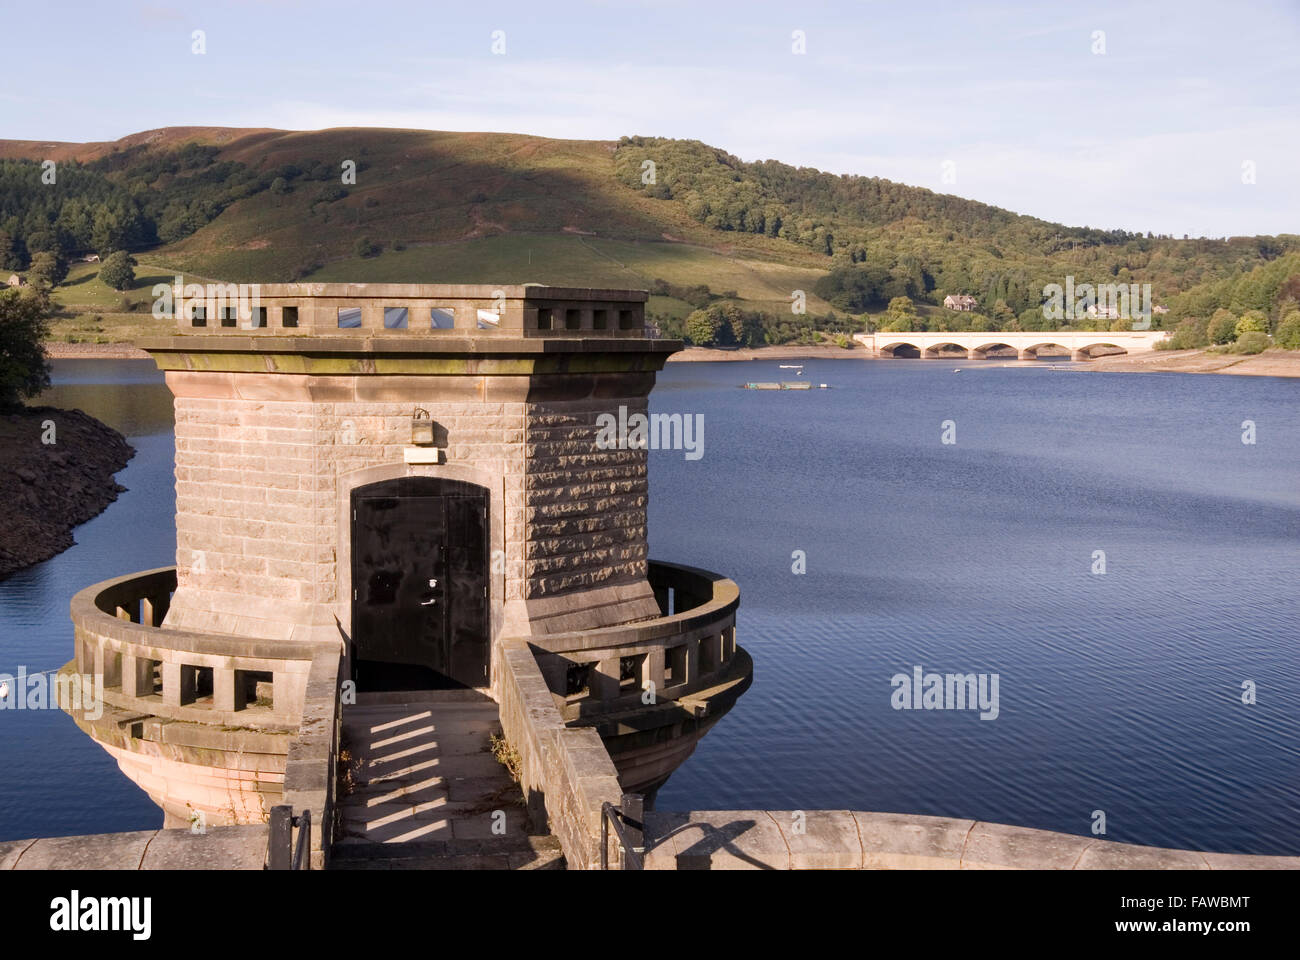 DERBYSHIRE UK - 06 Oct : Ladybower Reservoir west draw off tower and the A6013 Bridge on 06 Oct 2013 in the Peak District, UK Stock Photo